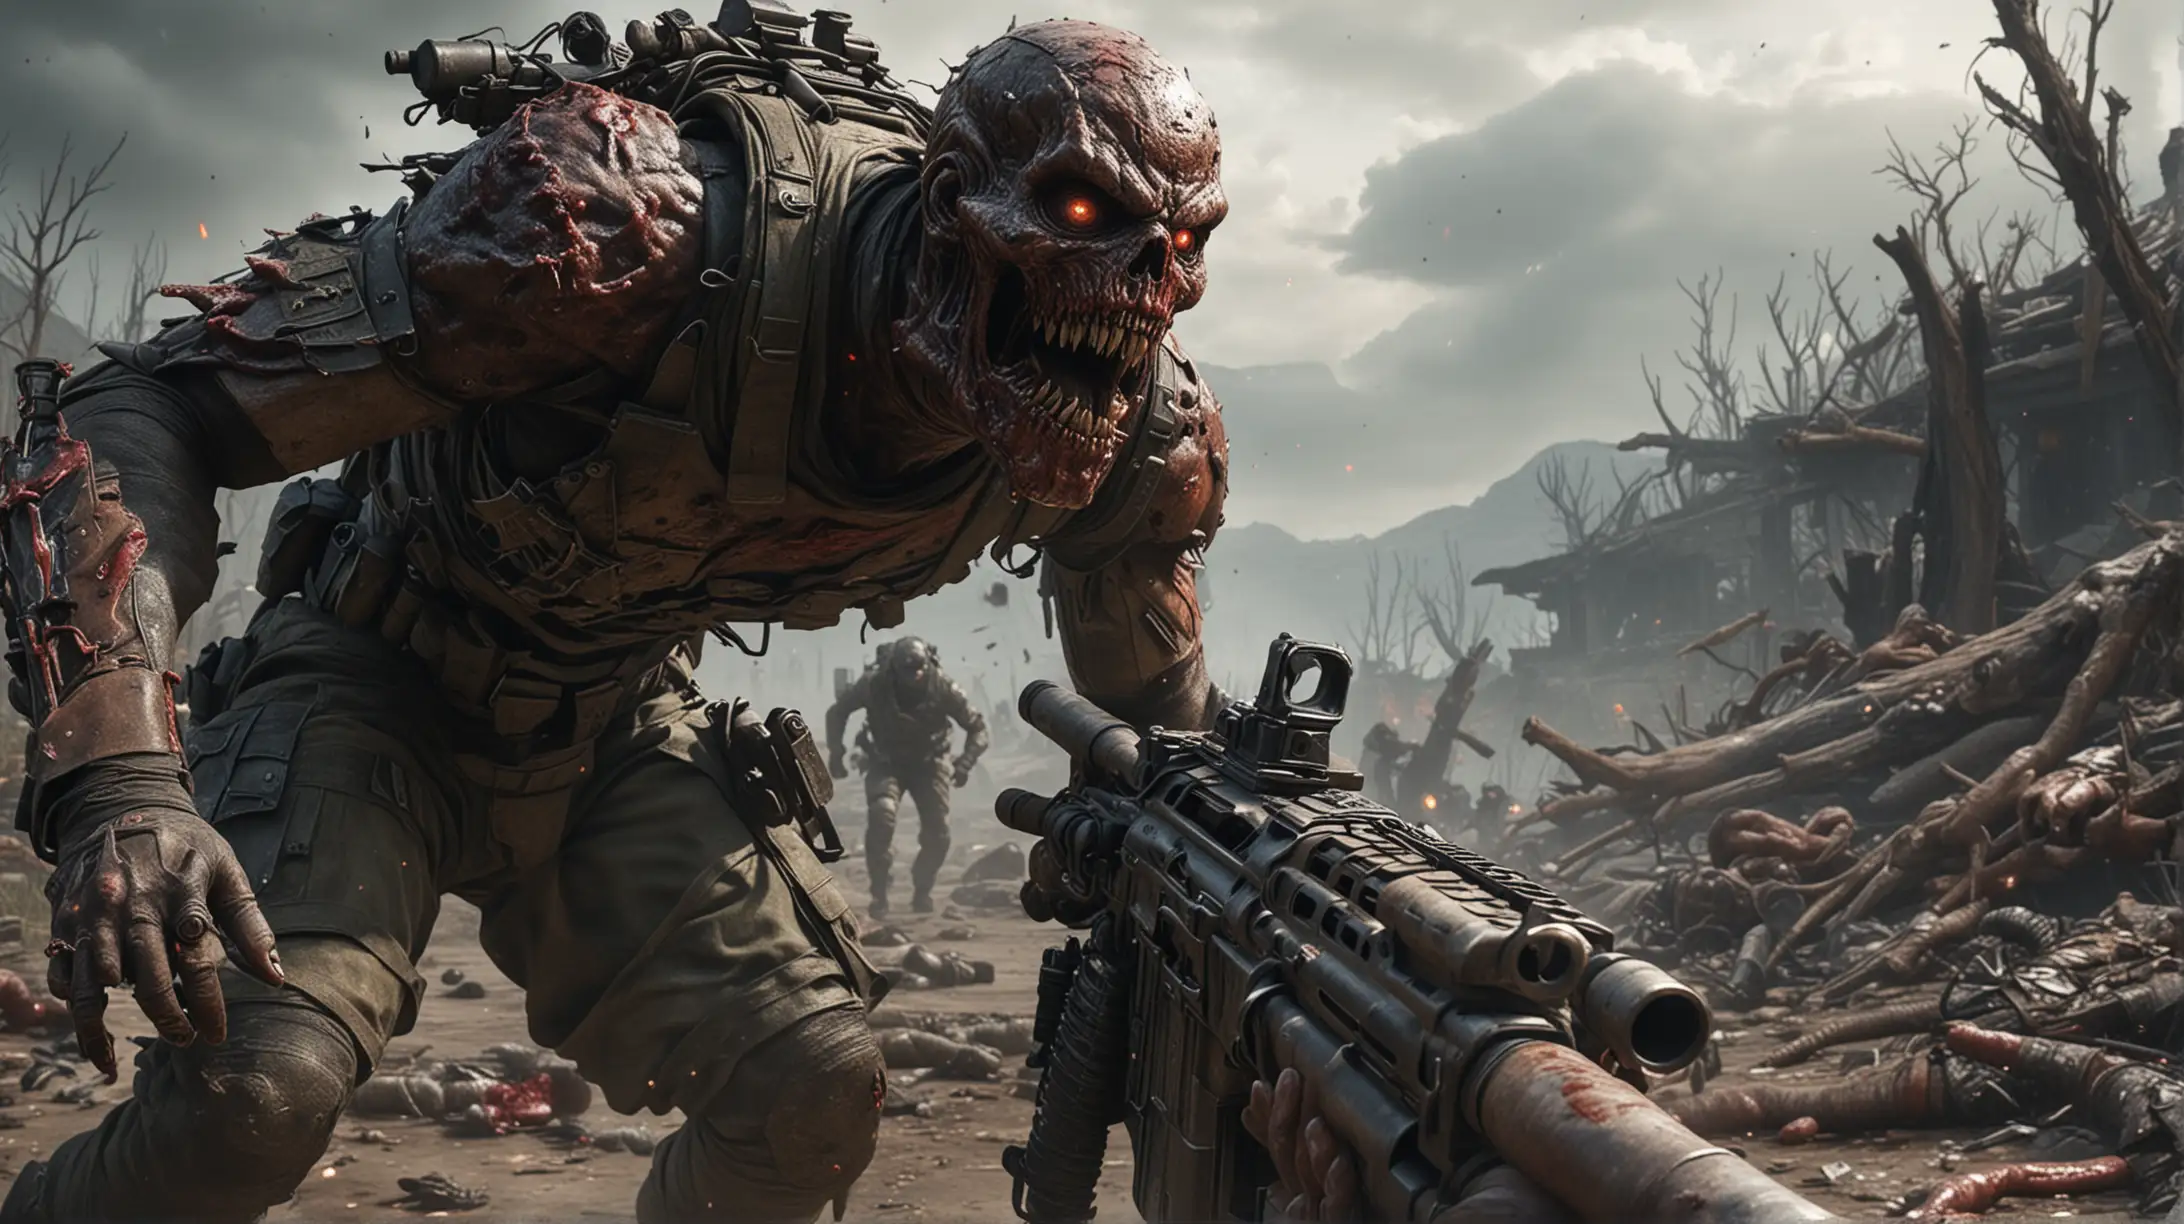 Soldier Shooting Mutant Monster in PostApocalyptic Environment